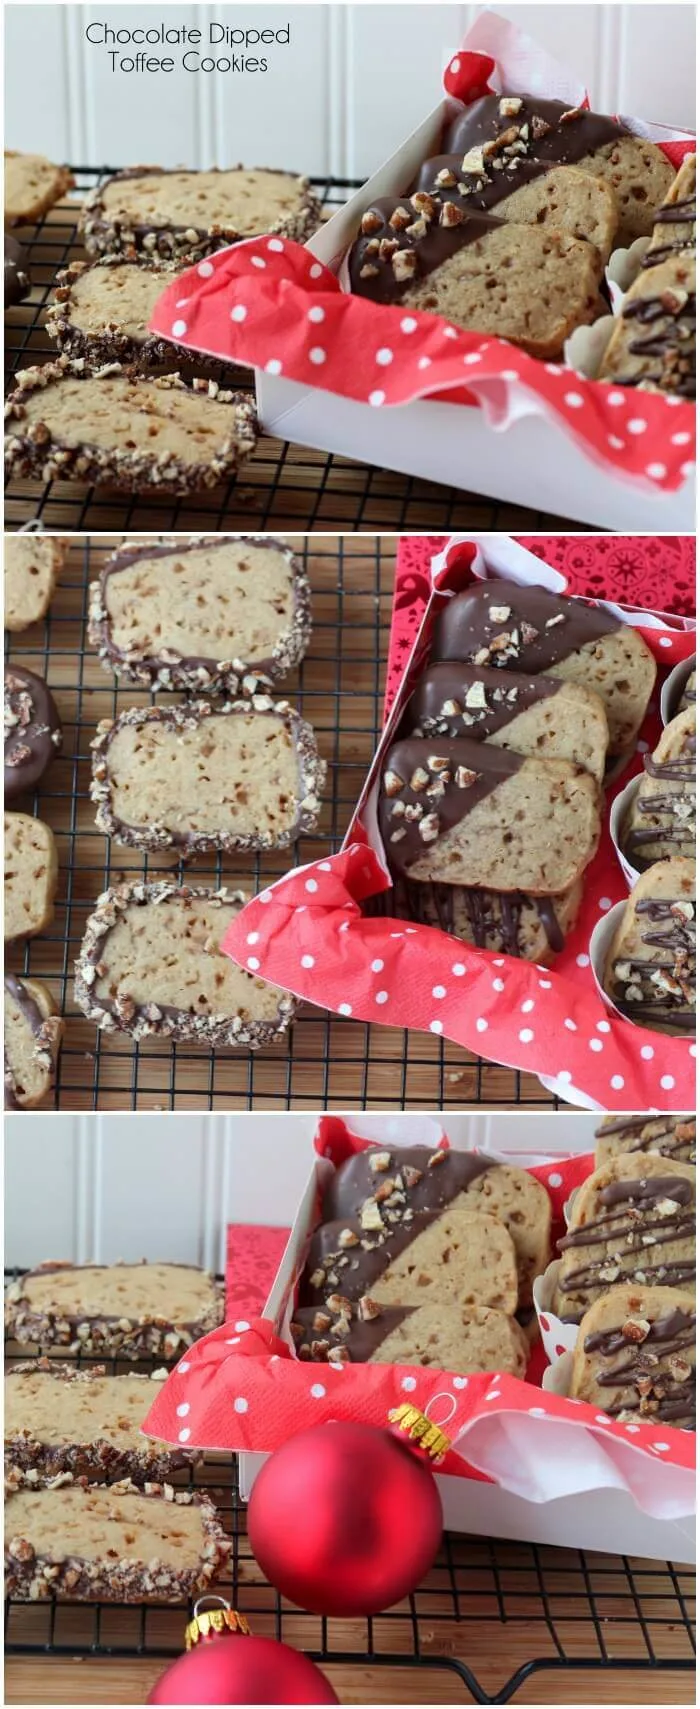 Slice and Bake Toffee Cookies are drizzled with chocolate and chopped almonds.